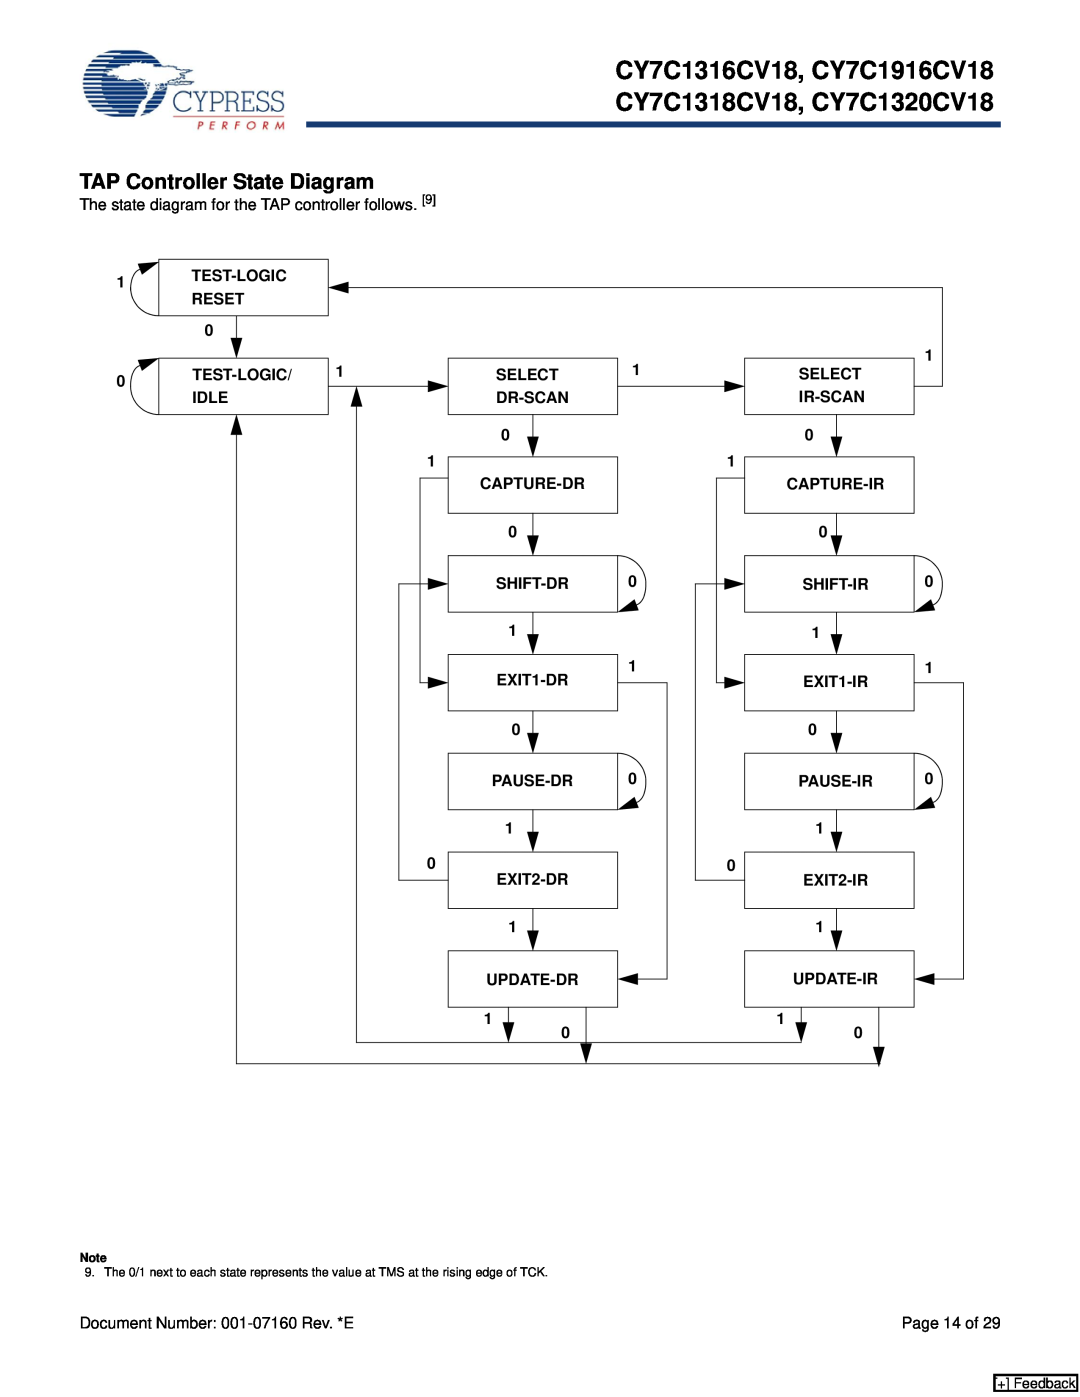 Cypress manual TAP Controller State Diagram, CY7C1316CV18, CY7C1916CV18 CY7C1318CV18, CY7C1320CV18, Page 14 of 